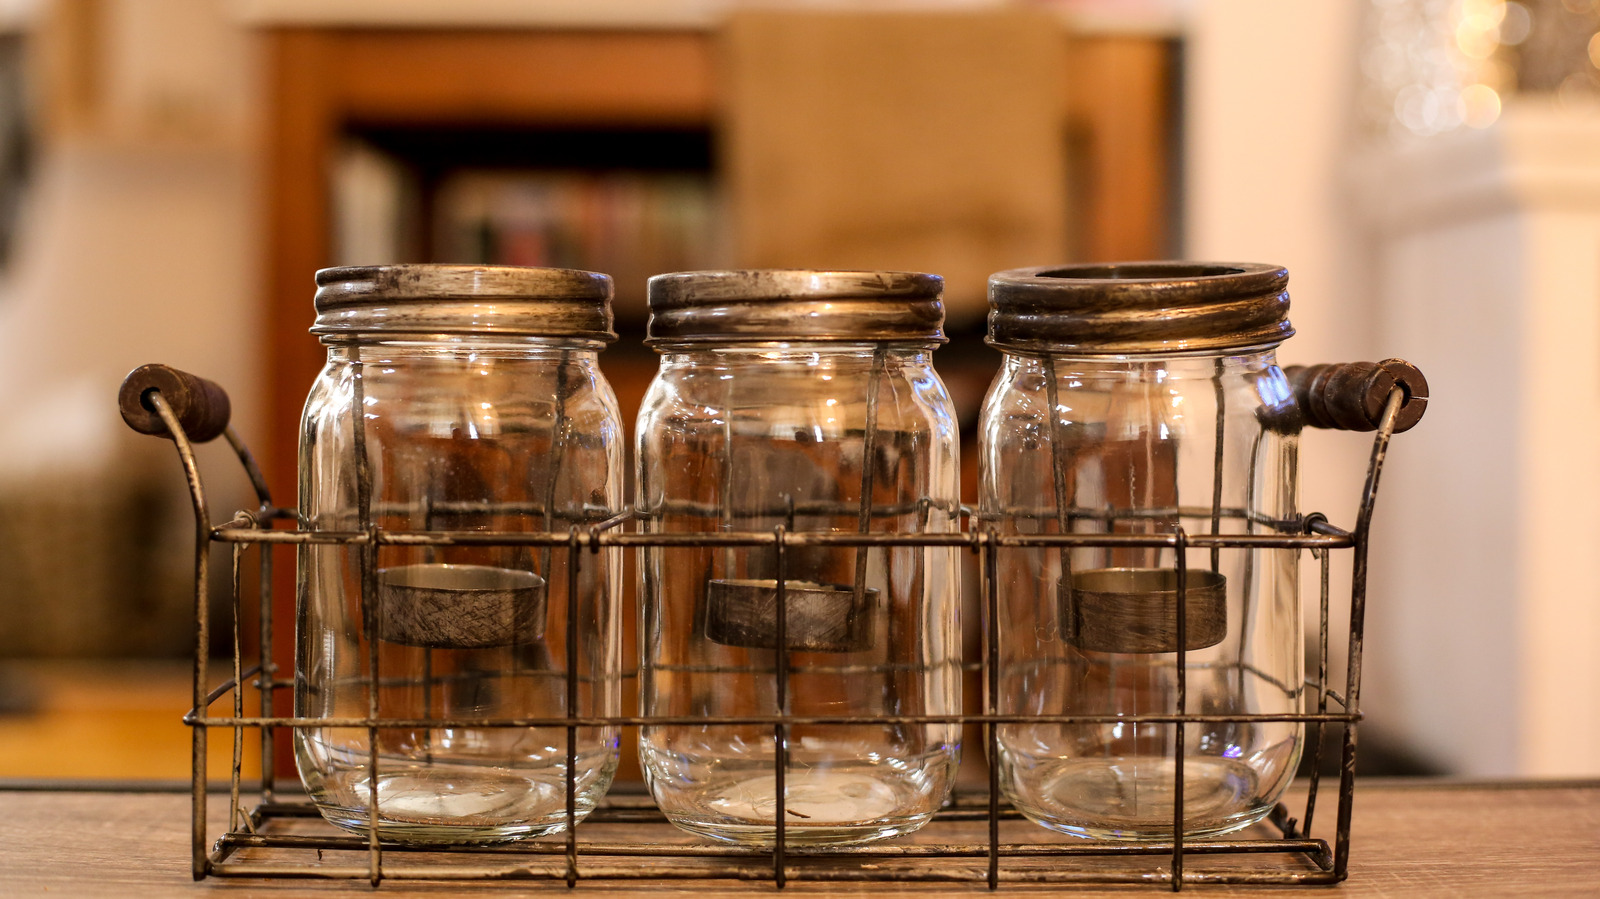 https://www.housedigest.com/img/gallery/are-mason-jars-as-home-decor-going-out-of-style/l-intro-1660745763.jpg